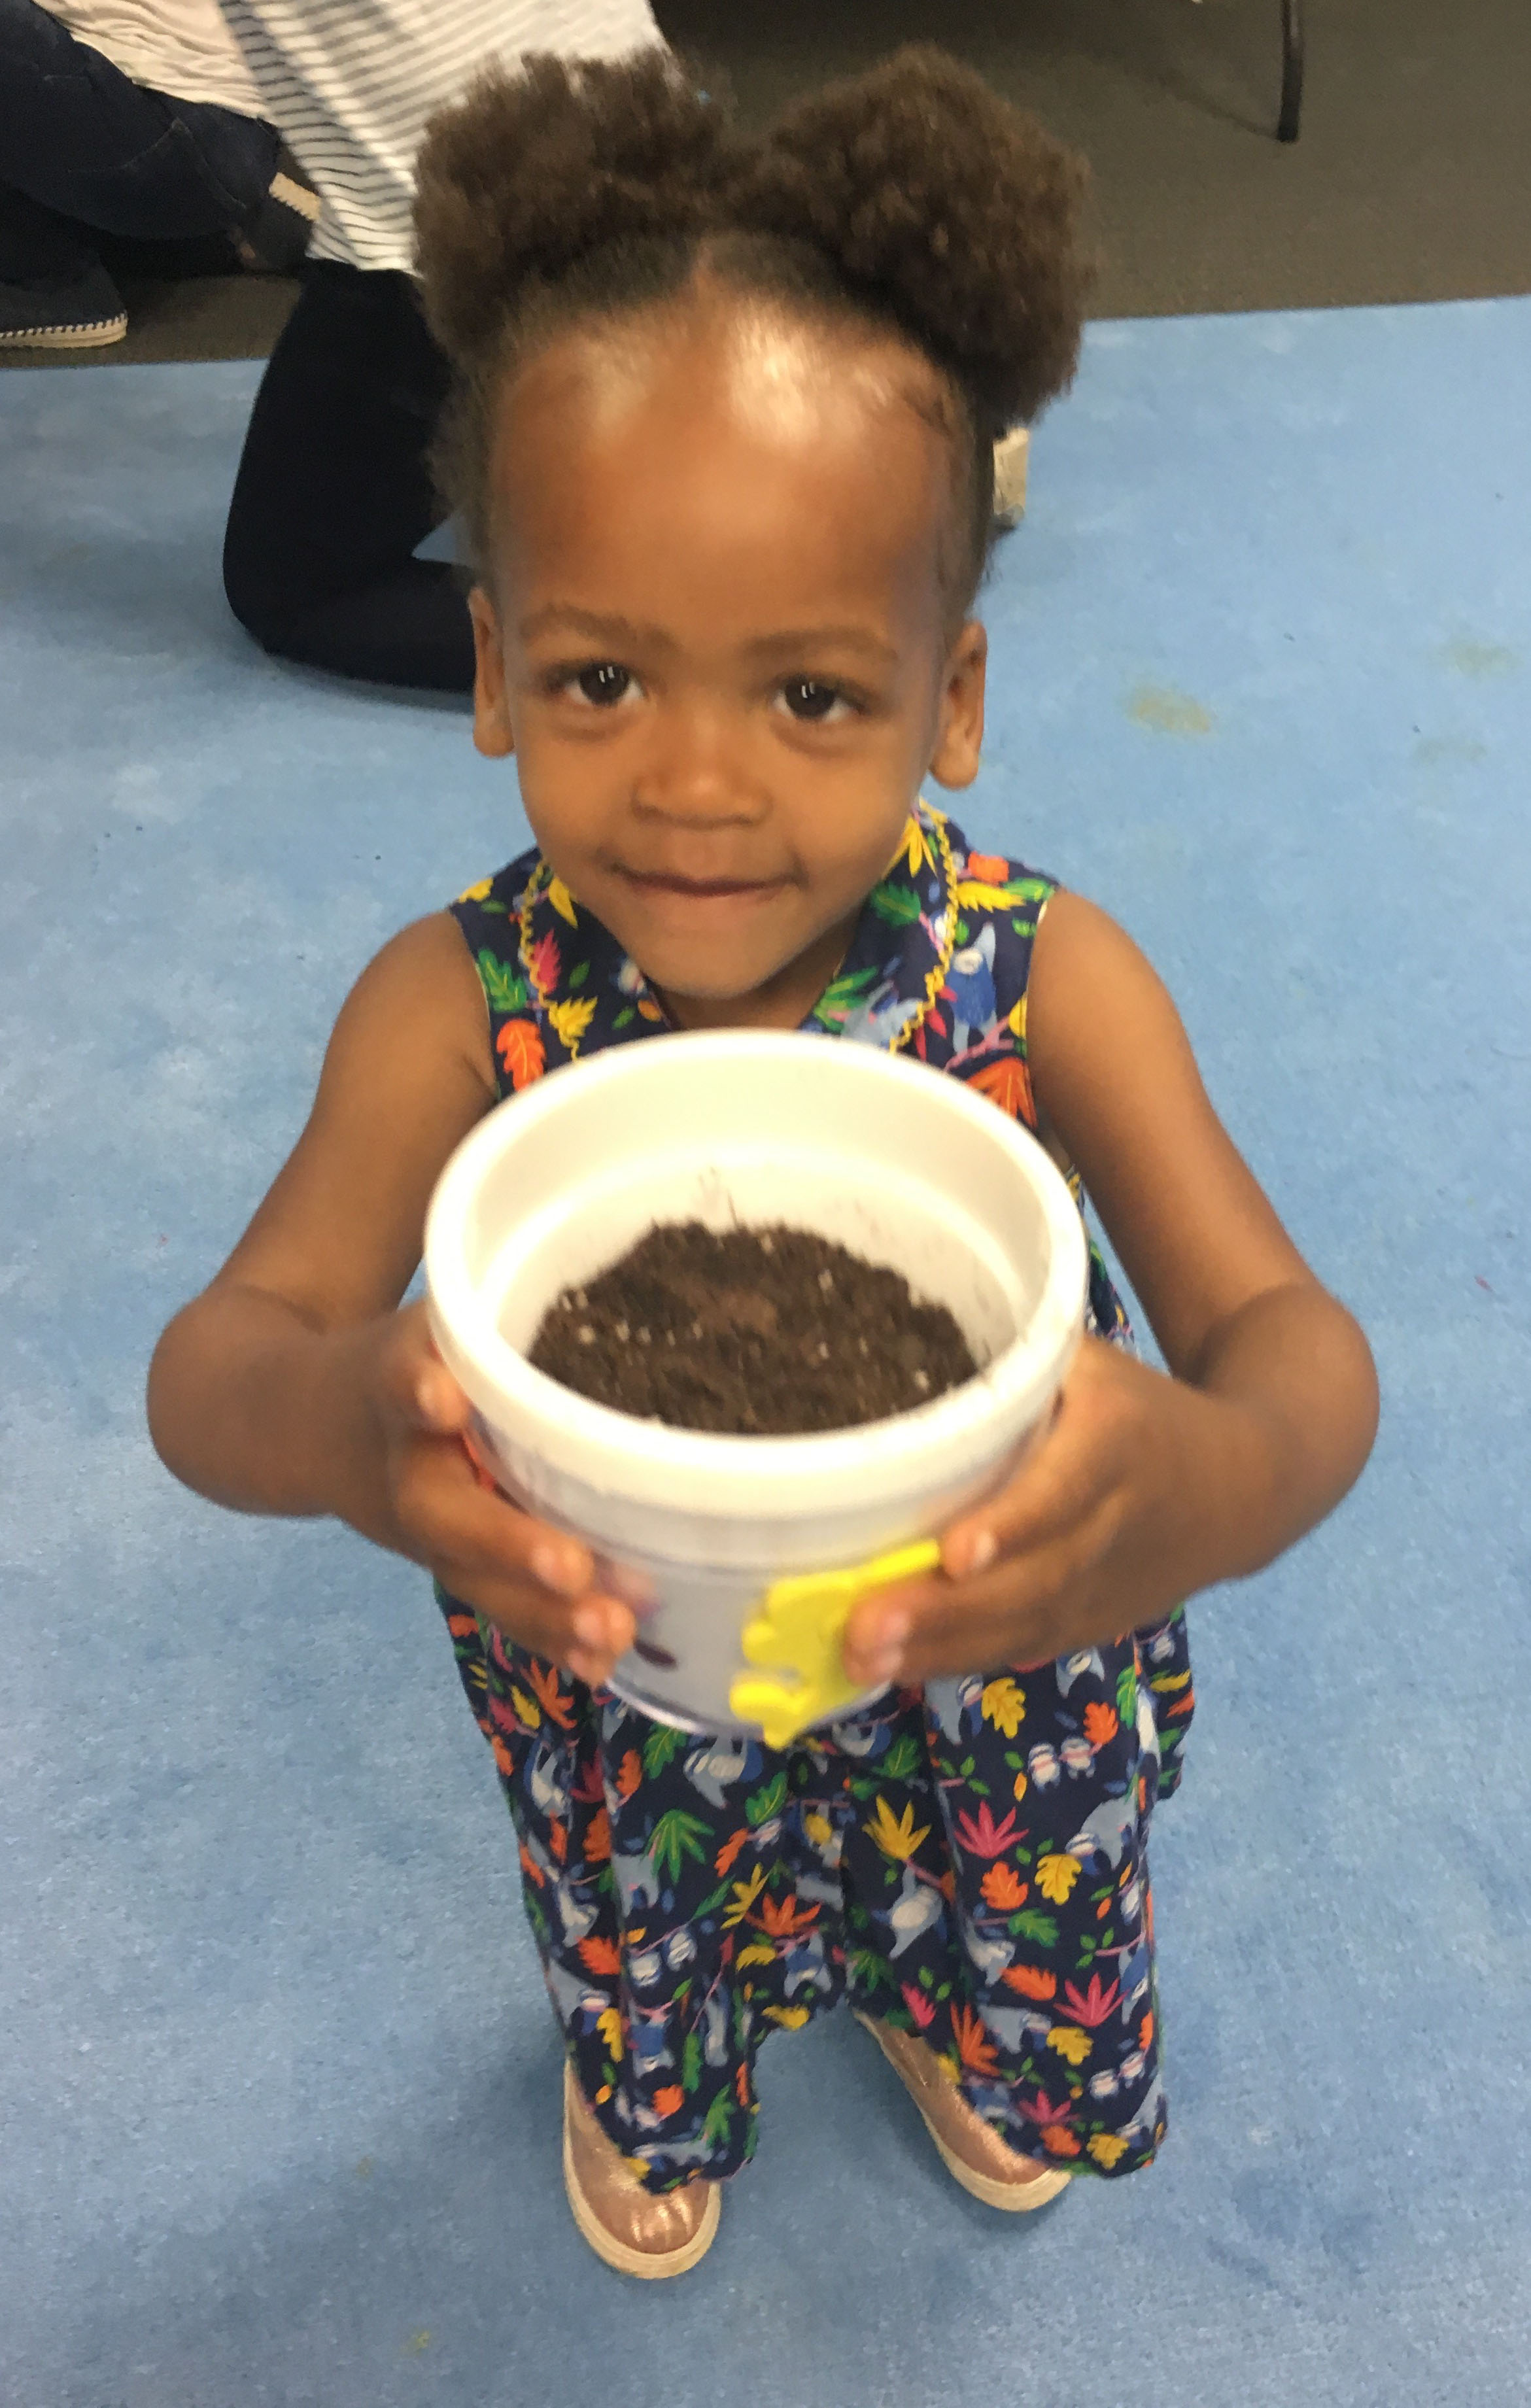 preschooler holding up a planter filled with soil